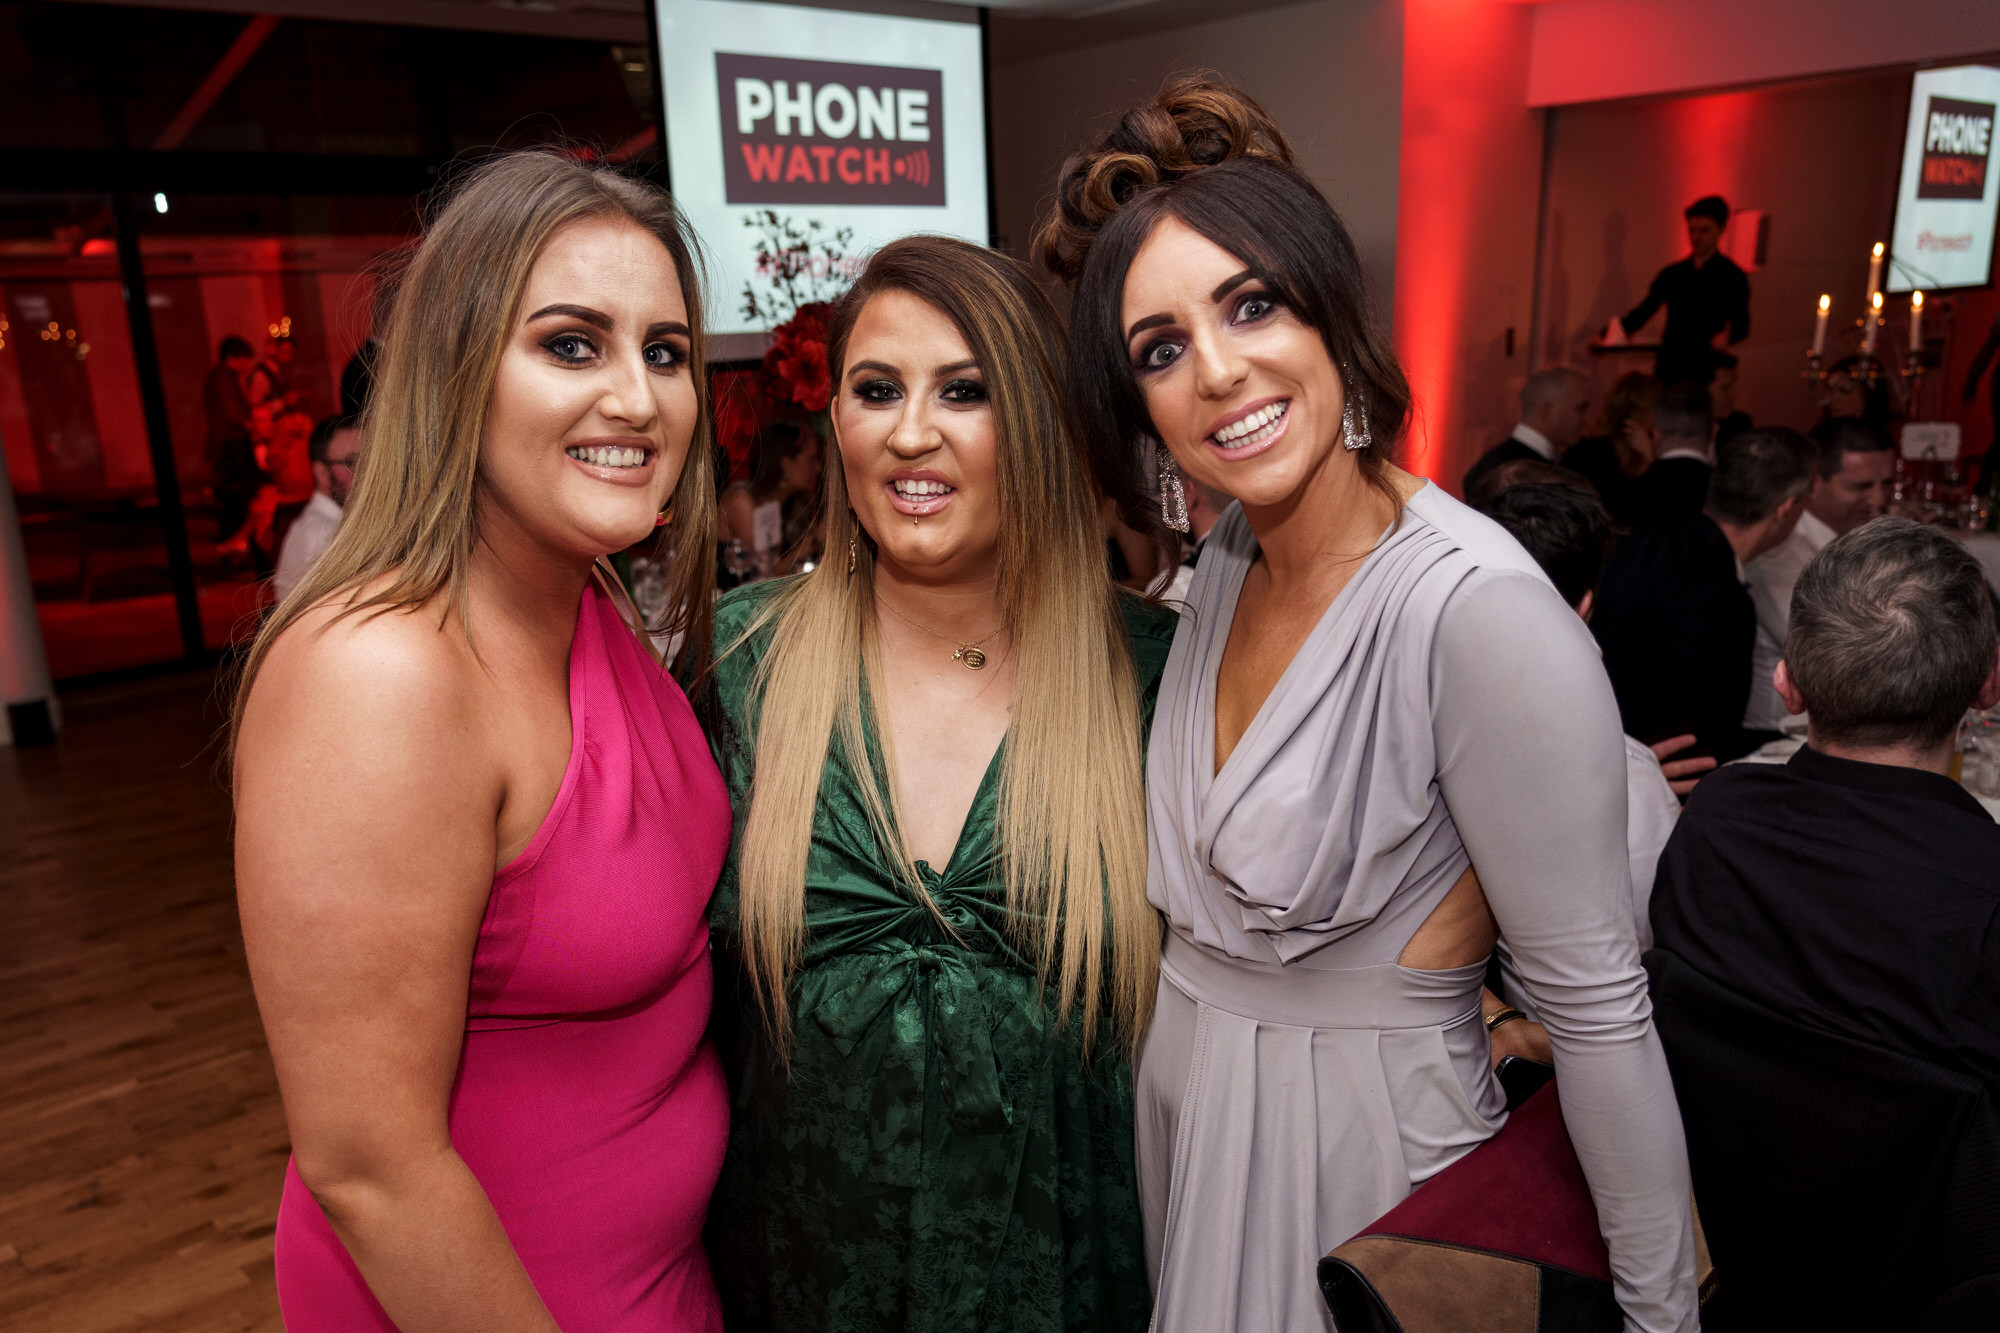  Phone Watch Christmas Party and Awards party in The Morrison Hotel Dublin. Corporate photography by Roger Kenny. 